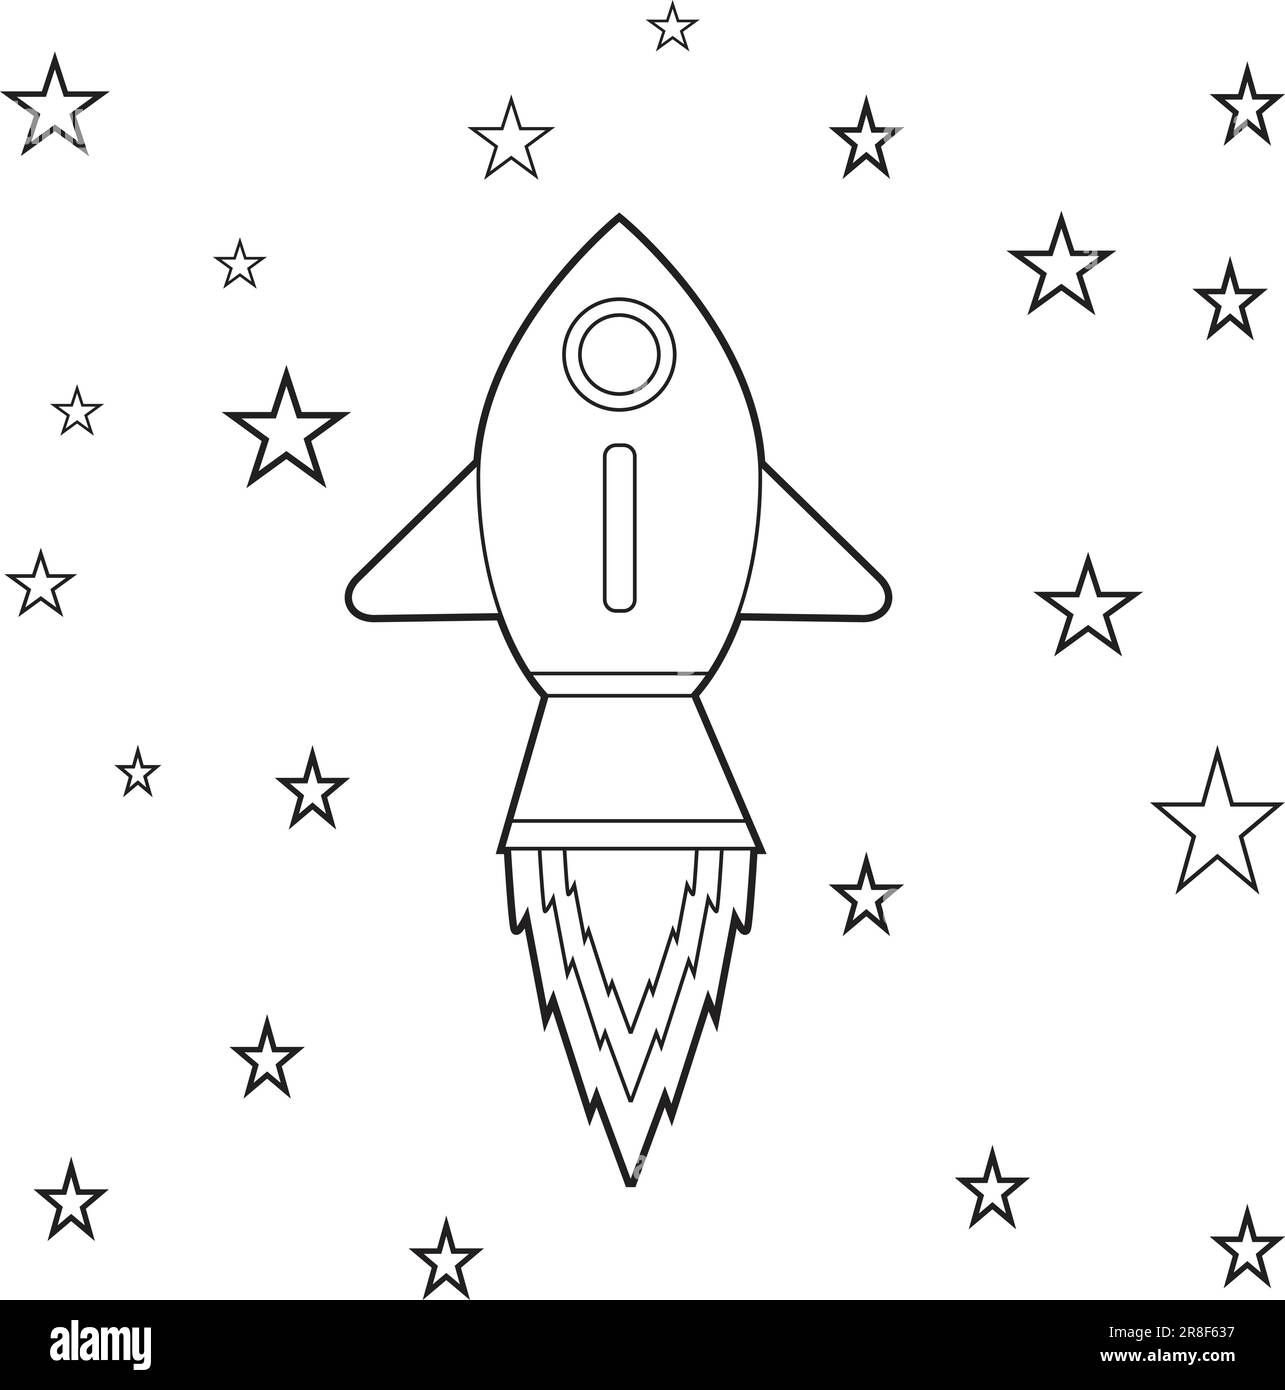 Coloring page of a Cartoon rocket flying in space with stars. Illustration for coloring page for kids Stock Vector